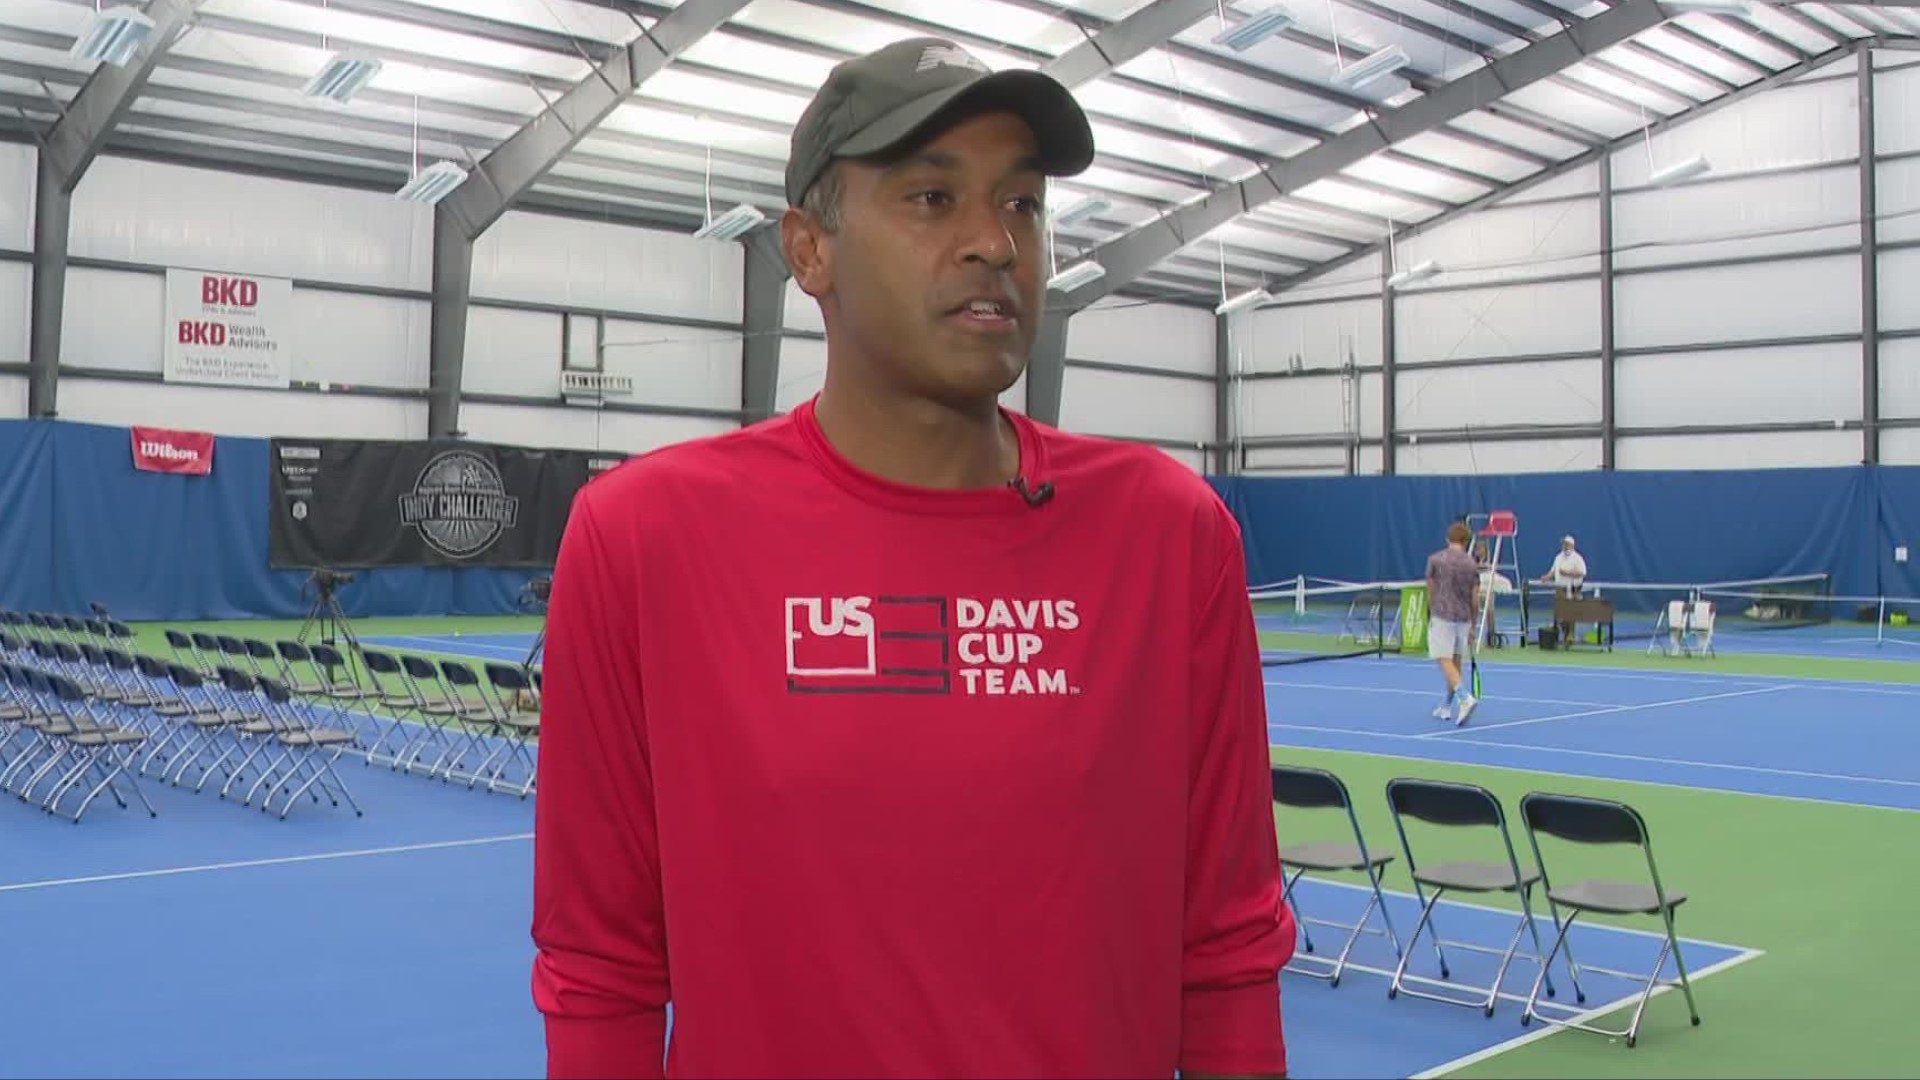 Ram Challenger brings professional tennis tournament back to Indy wthr